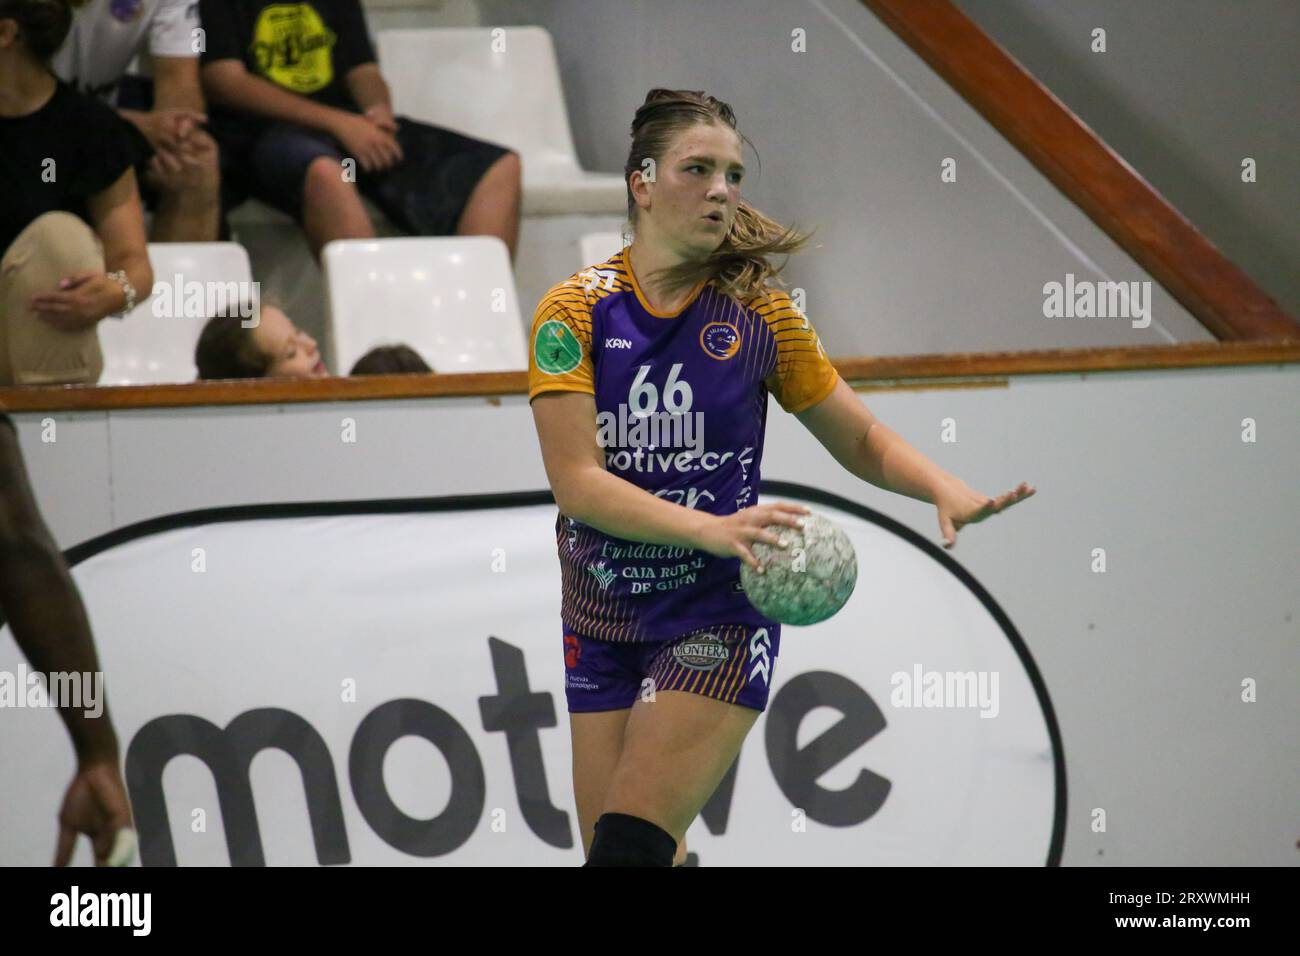 Gijon, Spain, 26th September, 2023: The player of Motive.co Gijon Balonmano La Calzada, Dorottya Margit Zentai (66) with the ball during the 8th Matchday of the Liga Guerreras Iberdrola 2023-24 between Motive.co Gijon Balonmano La Calzada and the Super Amara Bera Bera, on September 26, 2023, at the La Arena Sports Pavilion, in Gijón, Spain. (Photo by Alberto Brevers / Pacific Press) Stock Photo